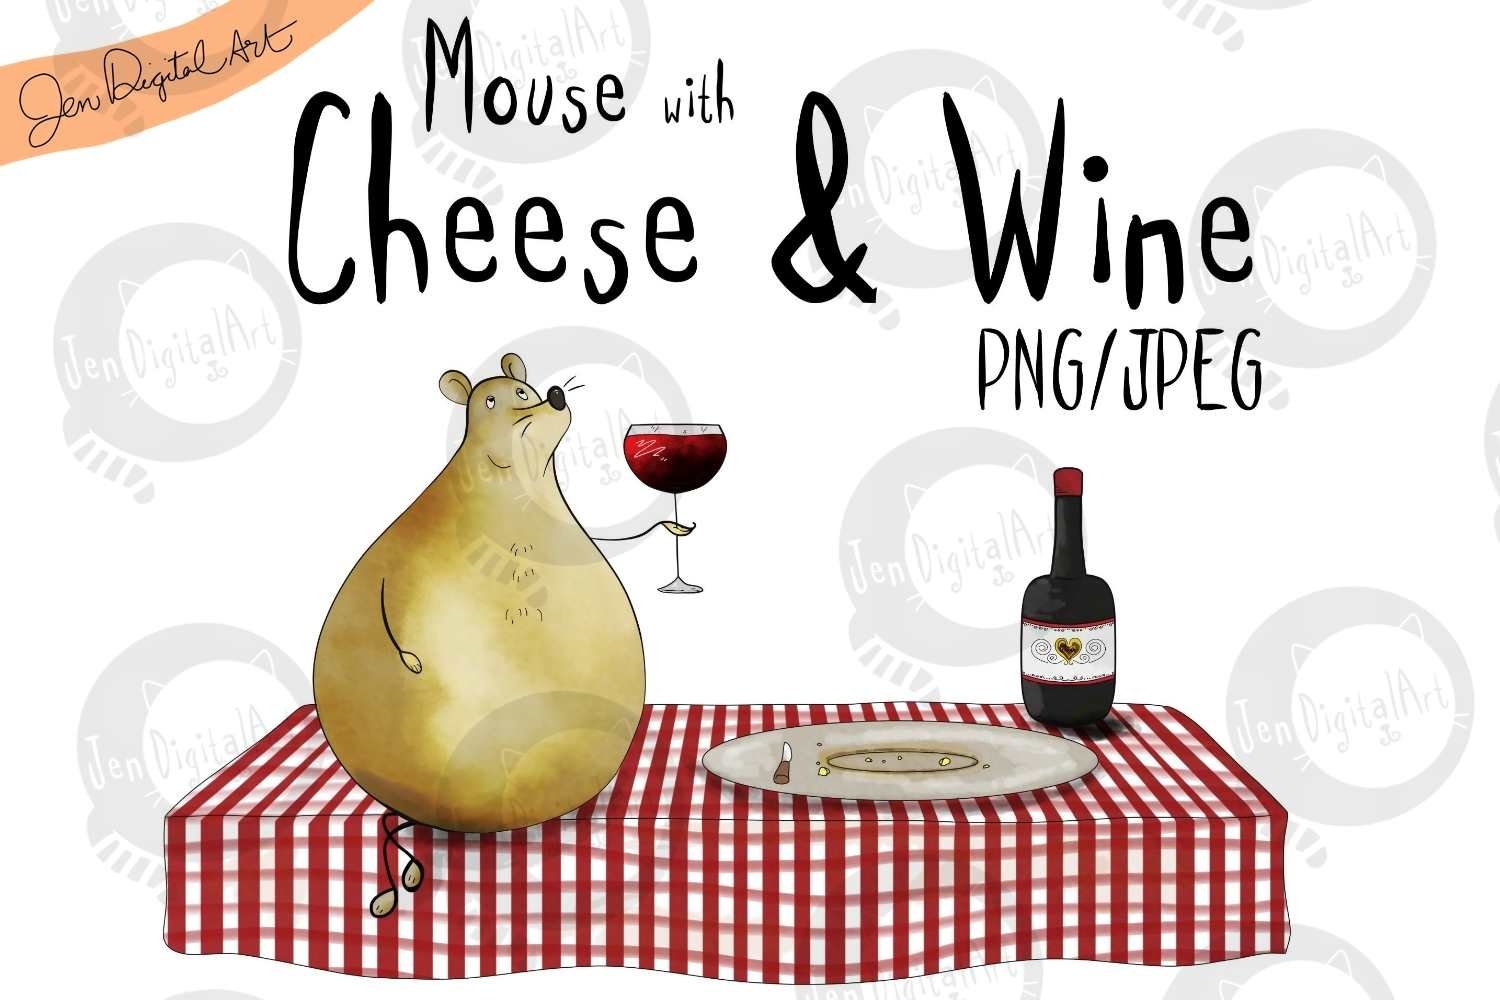 Funny image of a plump mouse with a glass of wine.